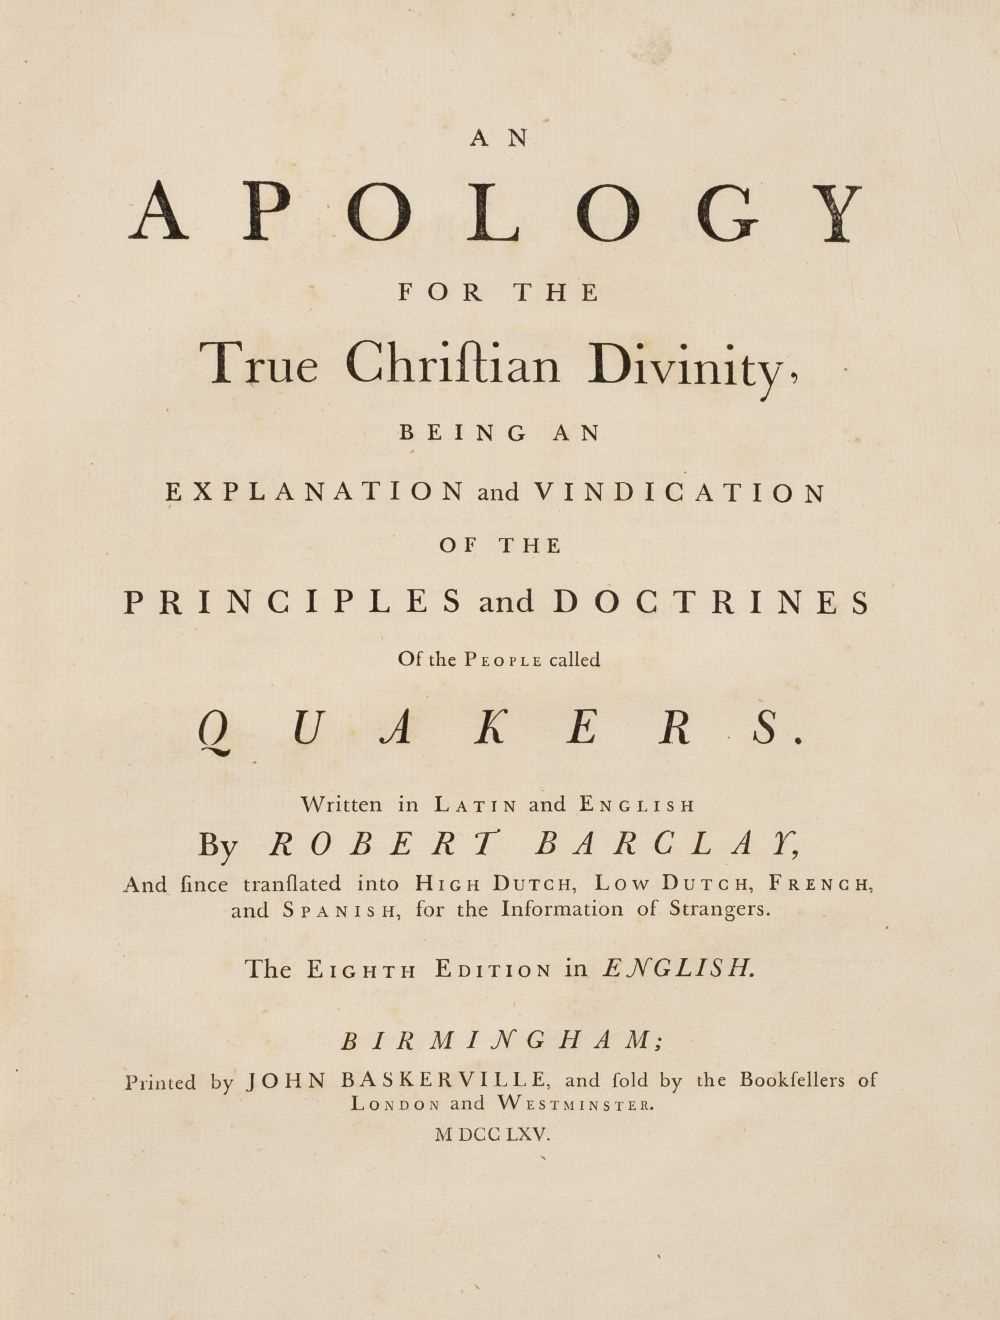 Lot 351 - Baskerville Press. An Apology for the True Christian Divinity..., Birmingham, 1765